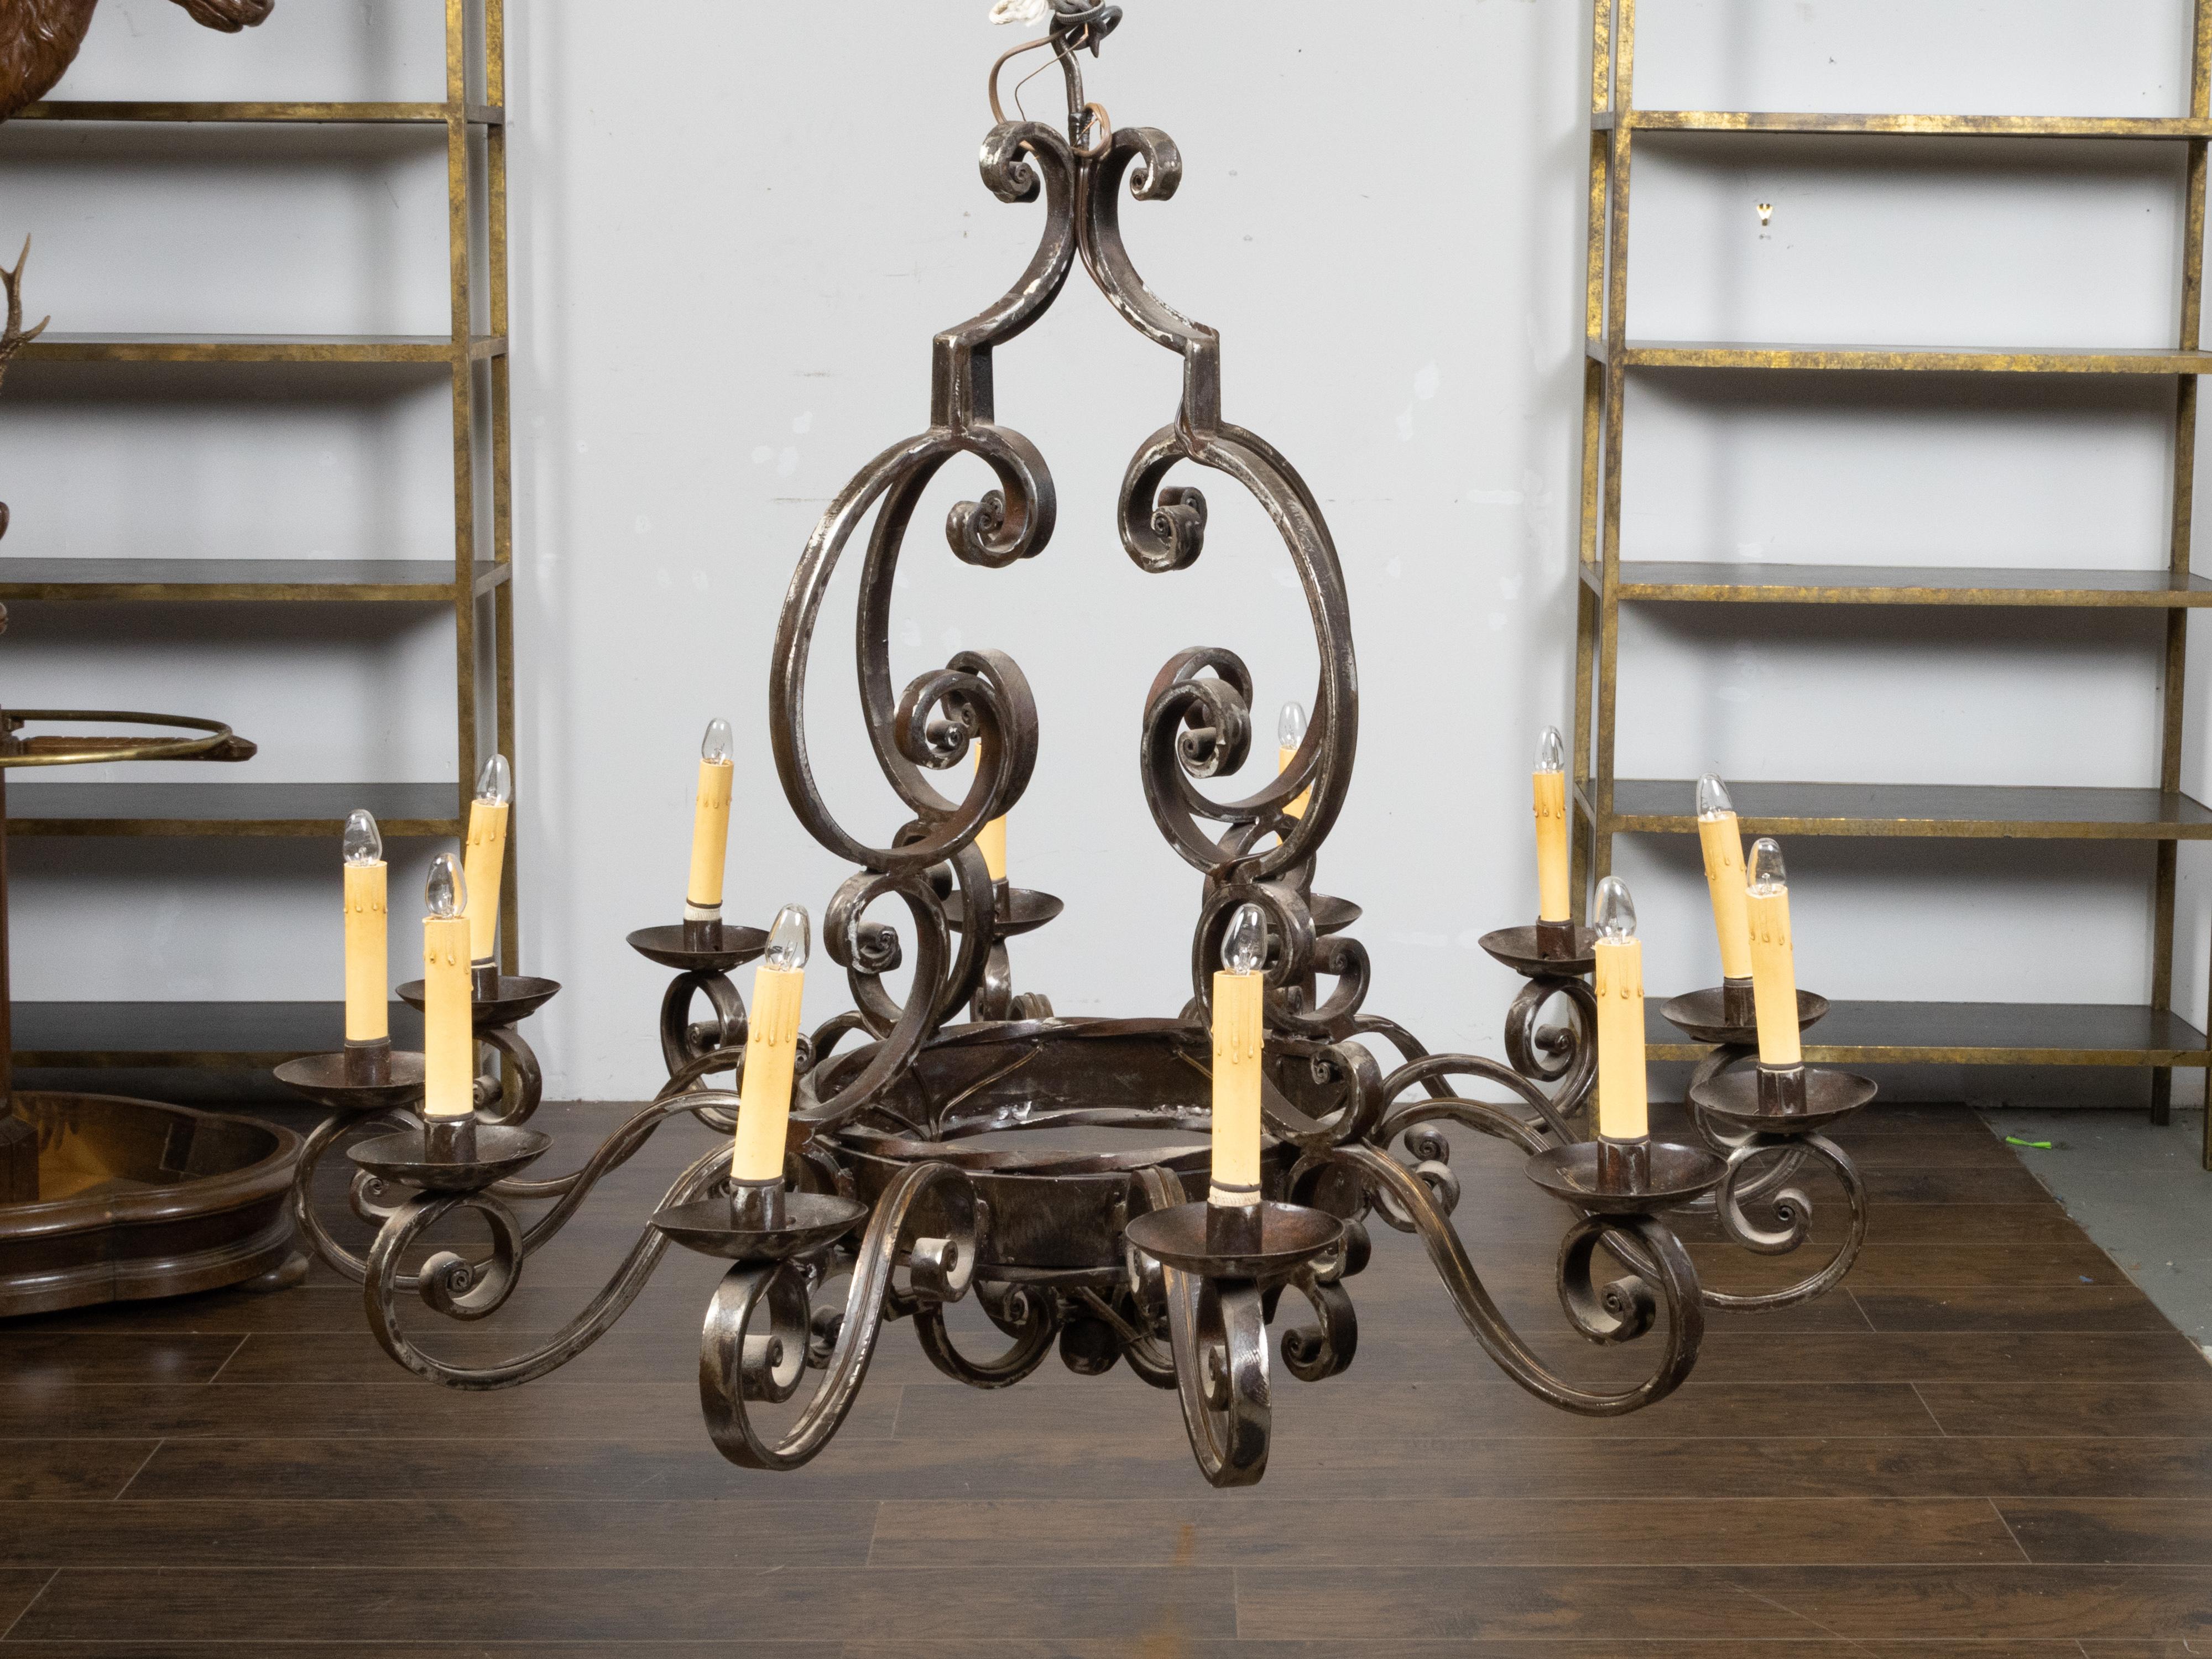 Midcentury French Steel 12-Light Chandelier with Scrolls and Dark Patina In Good Condition For Sale In Atlanta, GA